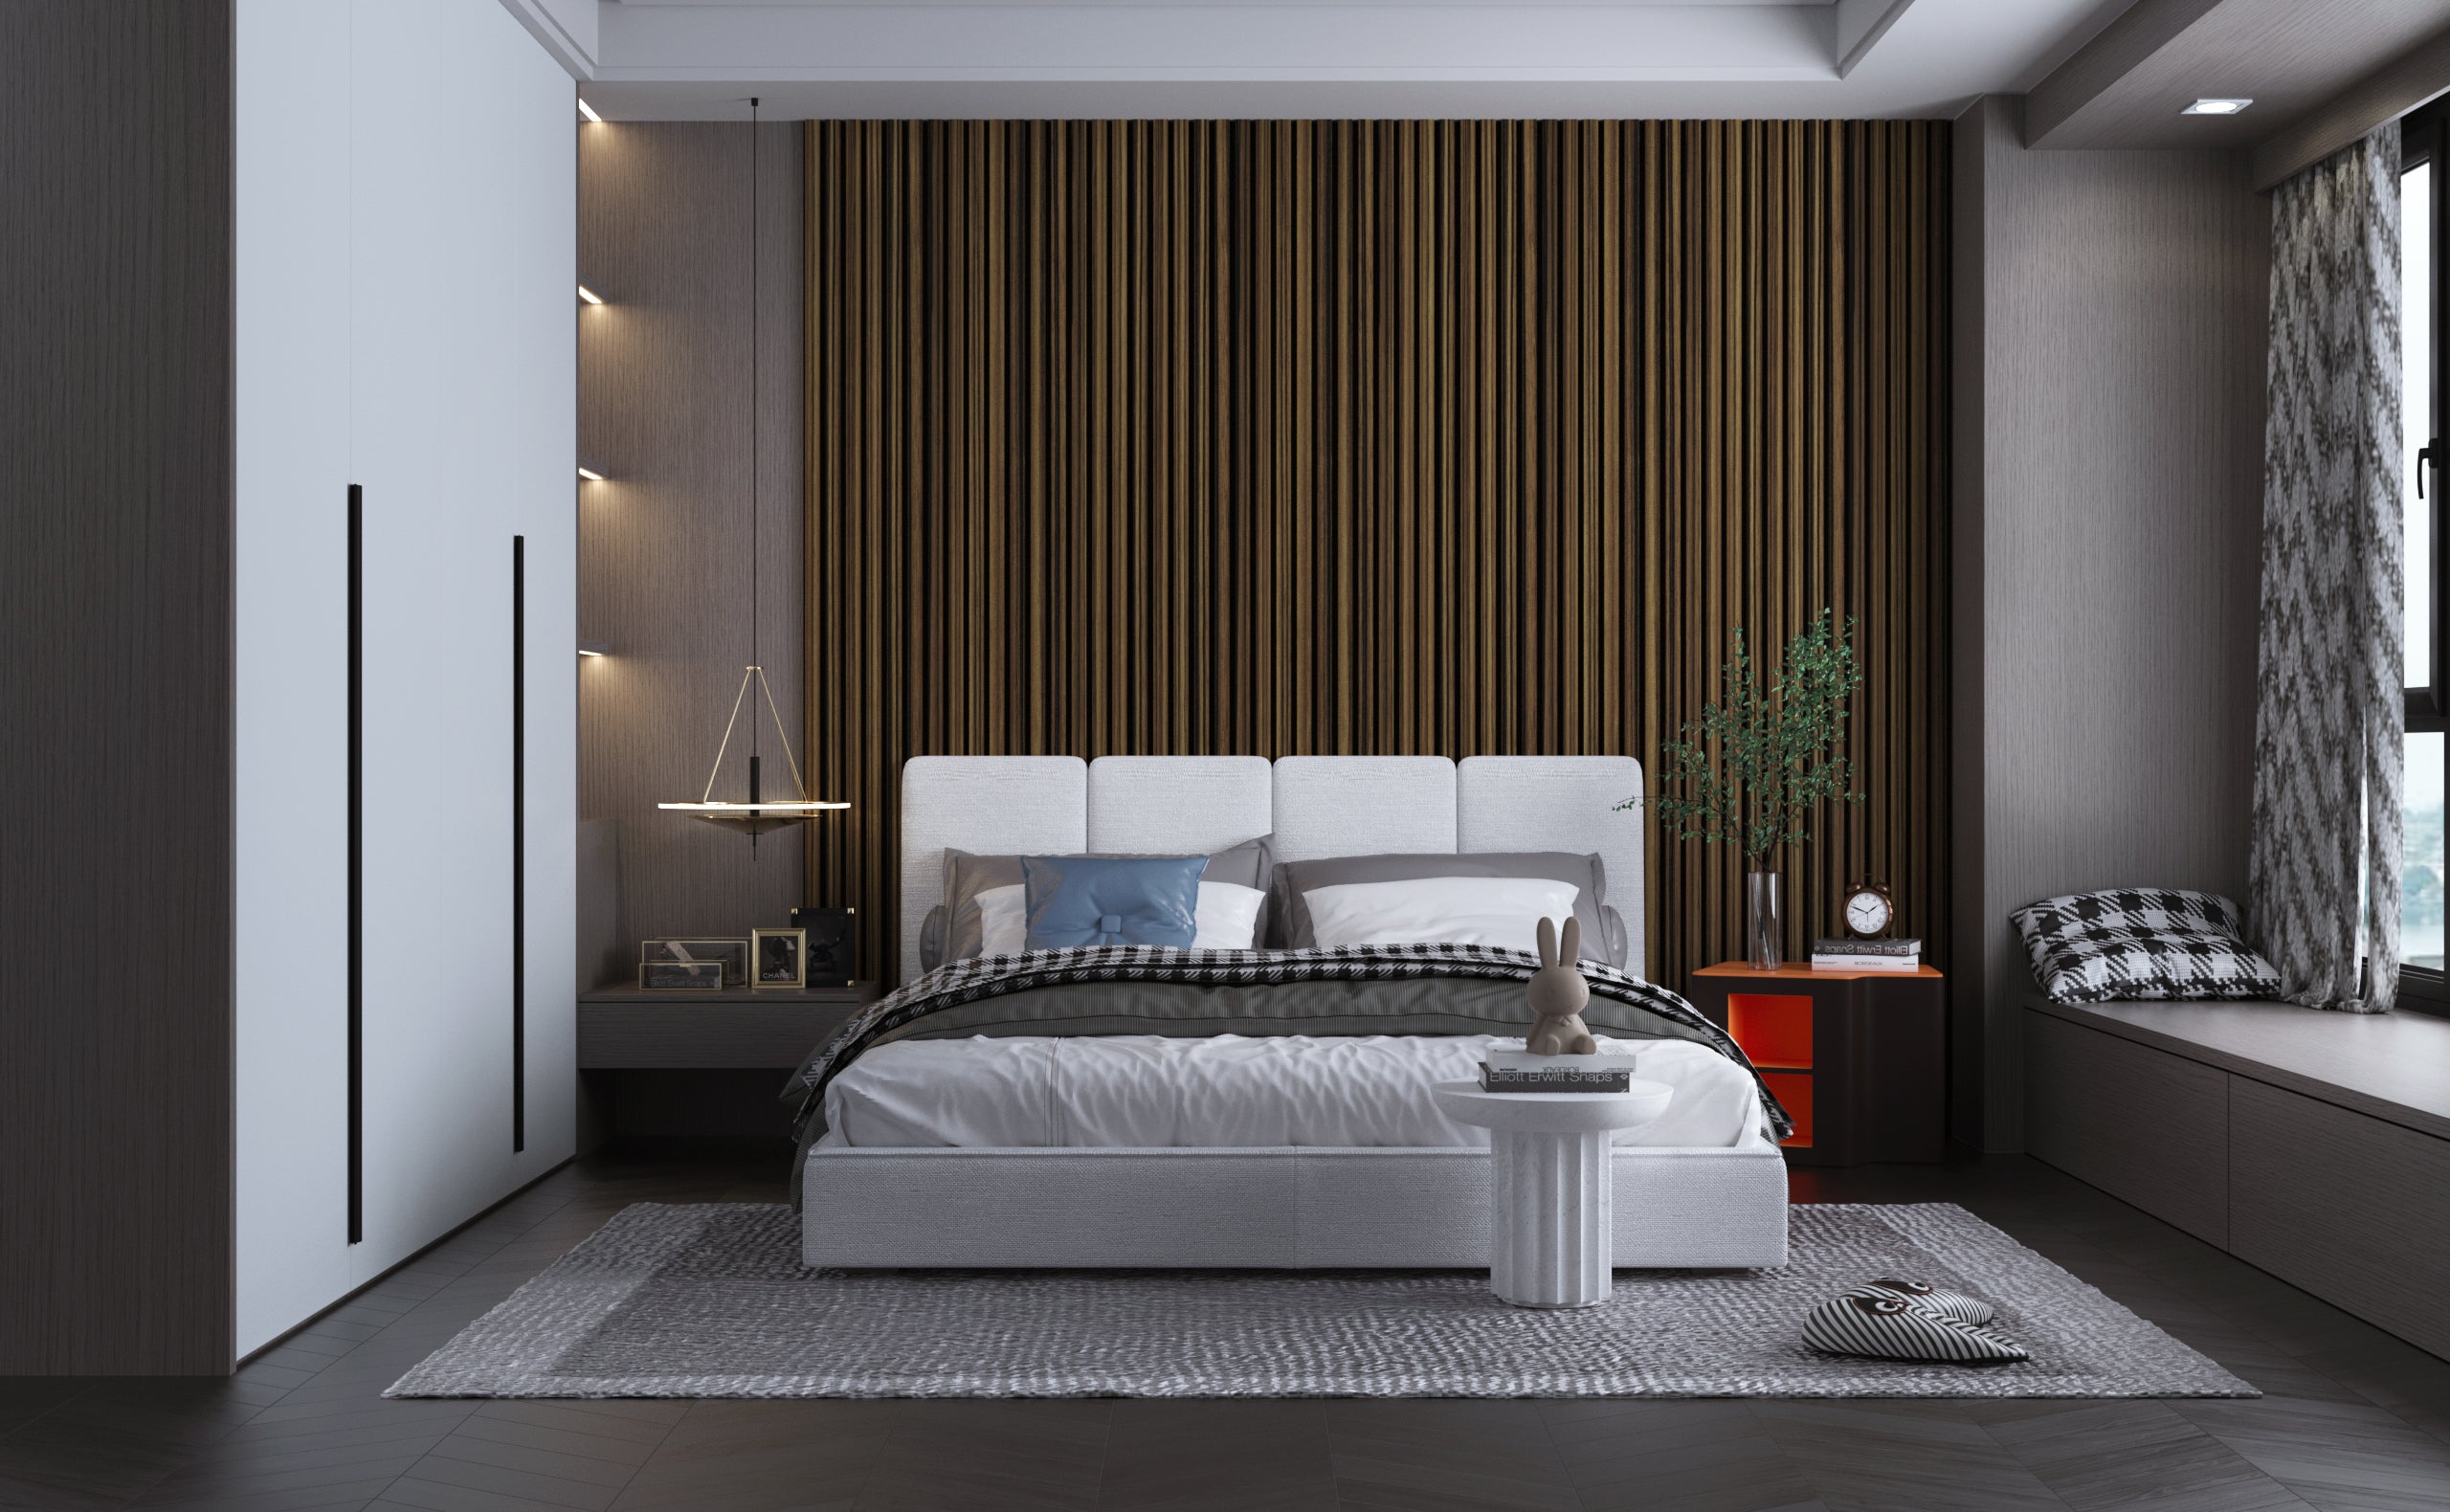 Elevate Your Space with ARTMUR's Acoustic Wood Slat Wall Panels